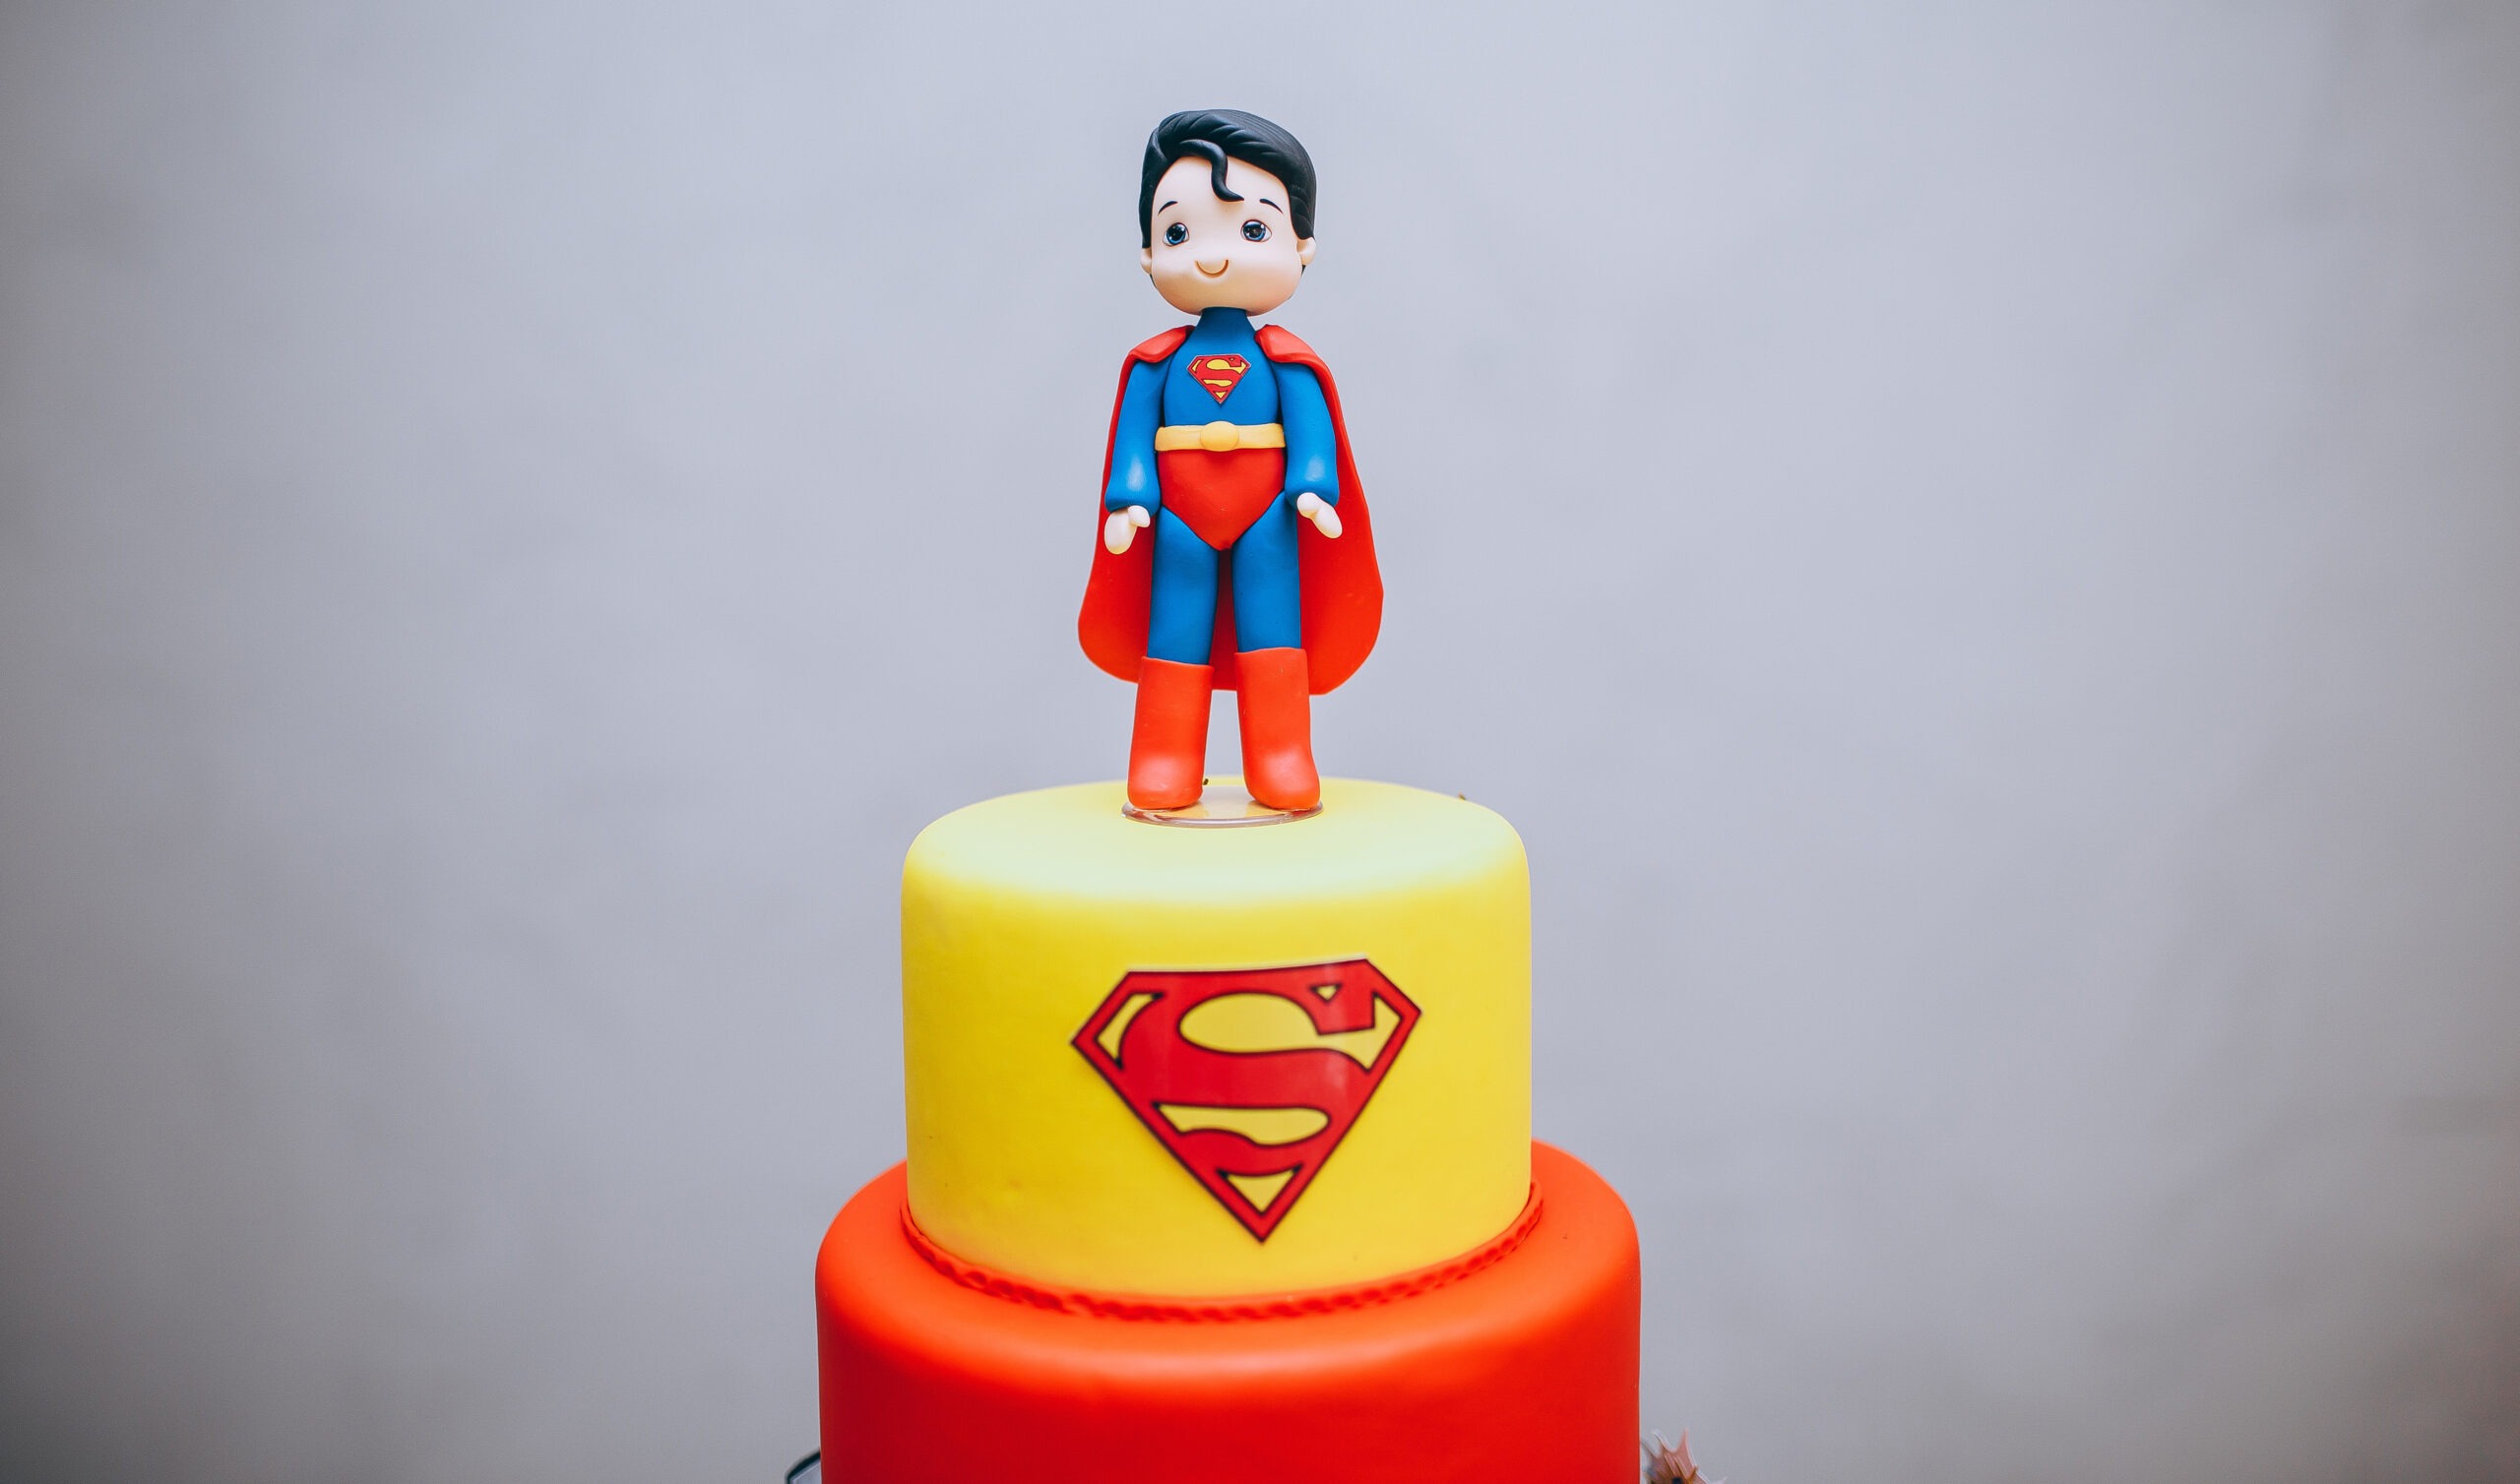 Superman-themed cake with Superman figurine on top